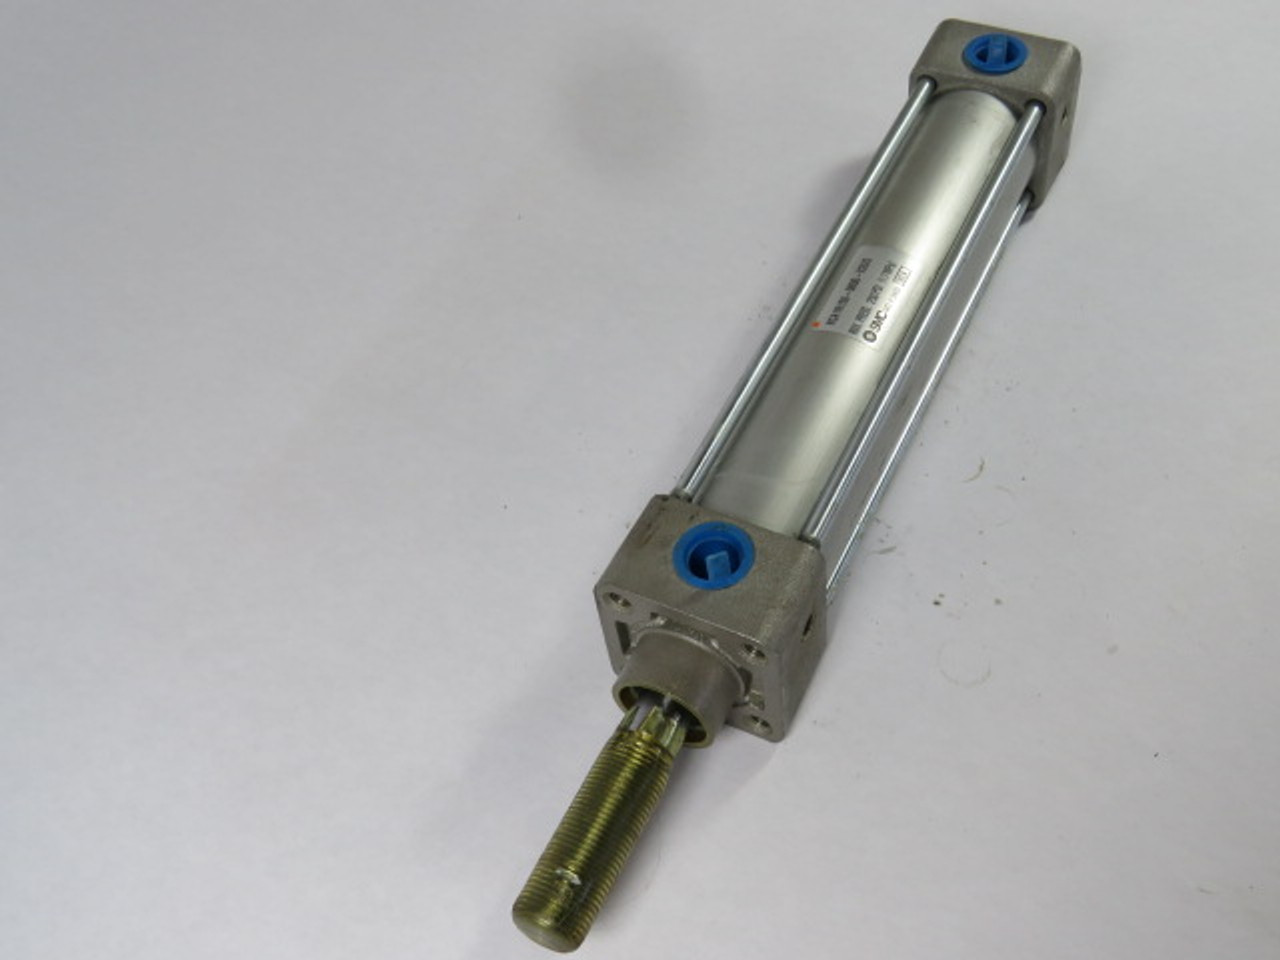 SMC NCA1R150-0600-X2US Pneumatic Air Cylinder 1-1/2" Bore 6" Stroke USED